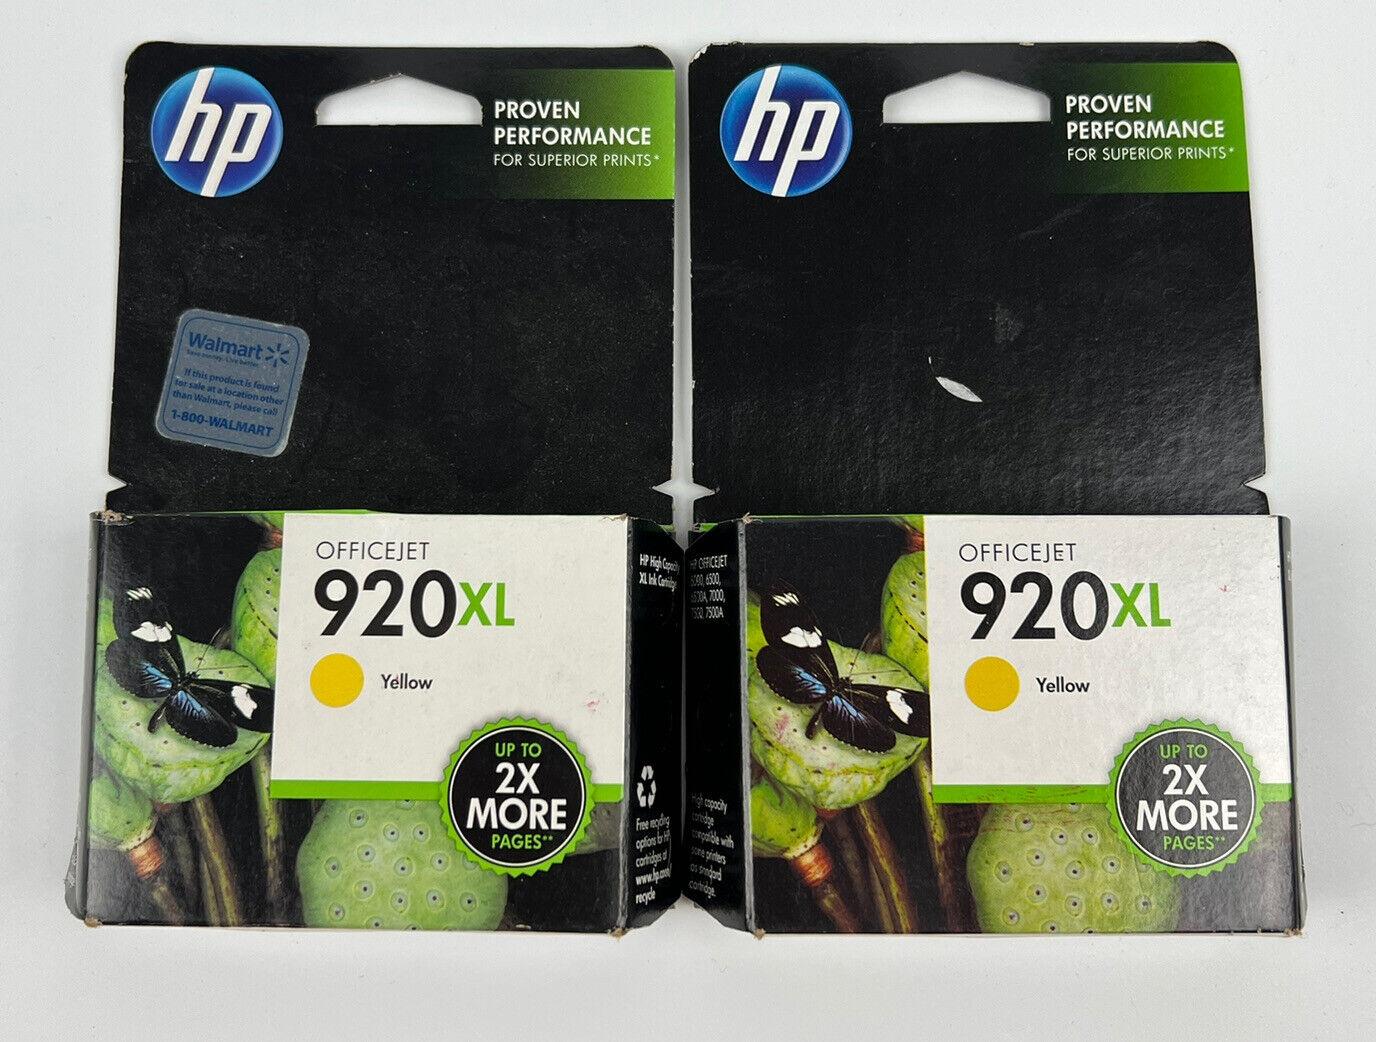 Set of 2 HP 920 XL YELLOW Ink Cartridges CD974AN - AUTHENTIC - EXP 2014 & 2016